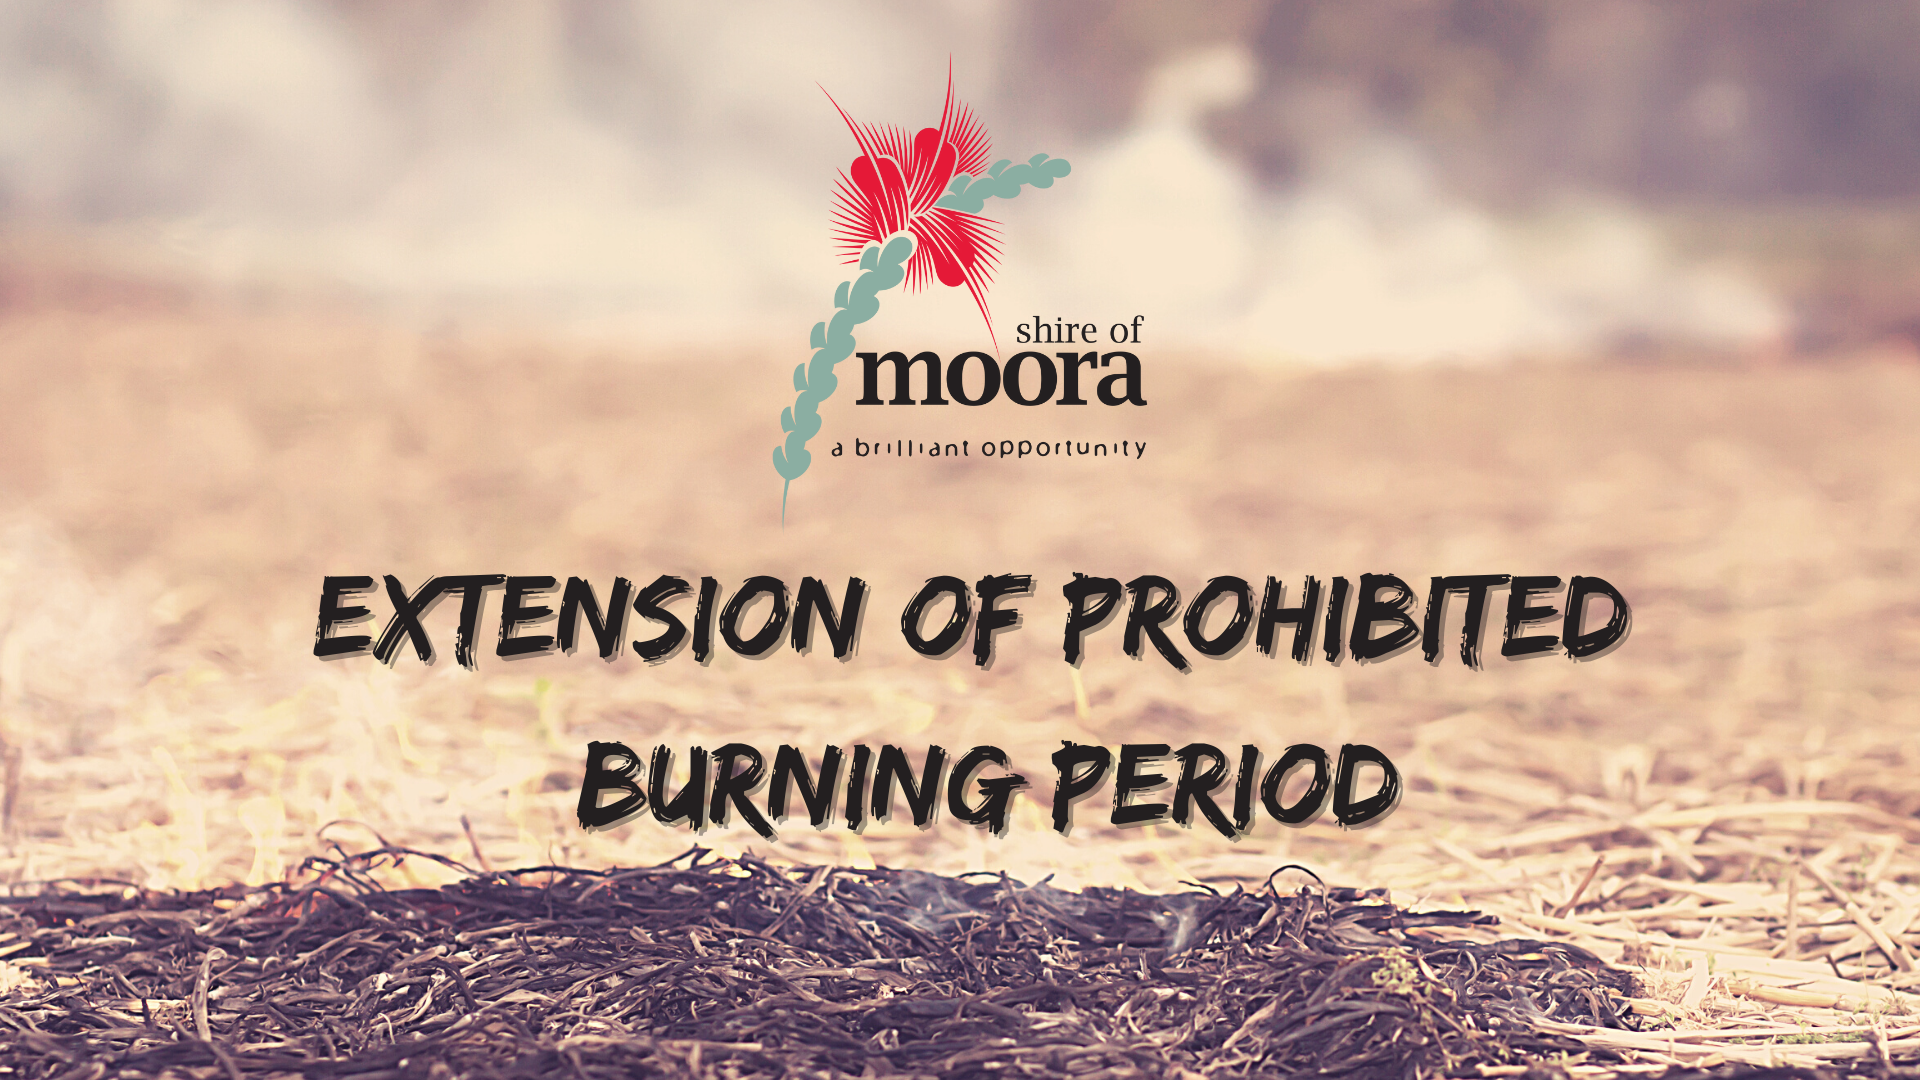 EXTENSION OF PROHIBITED BURNING PERIOD